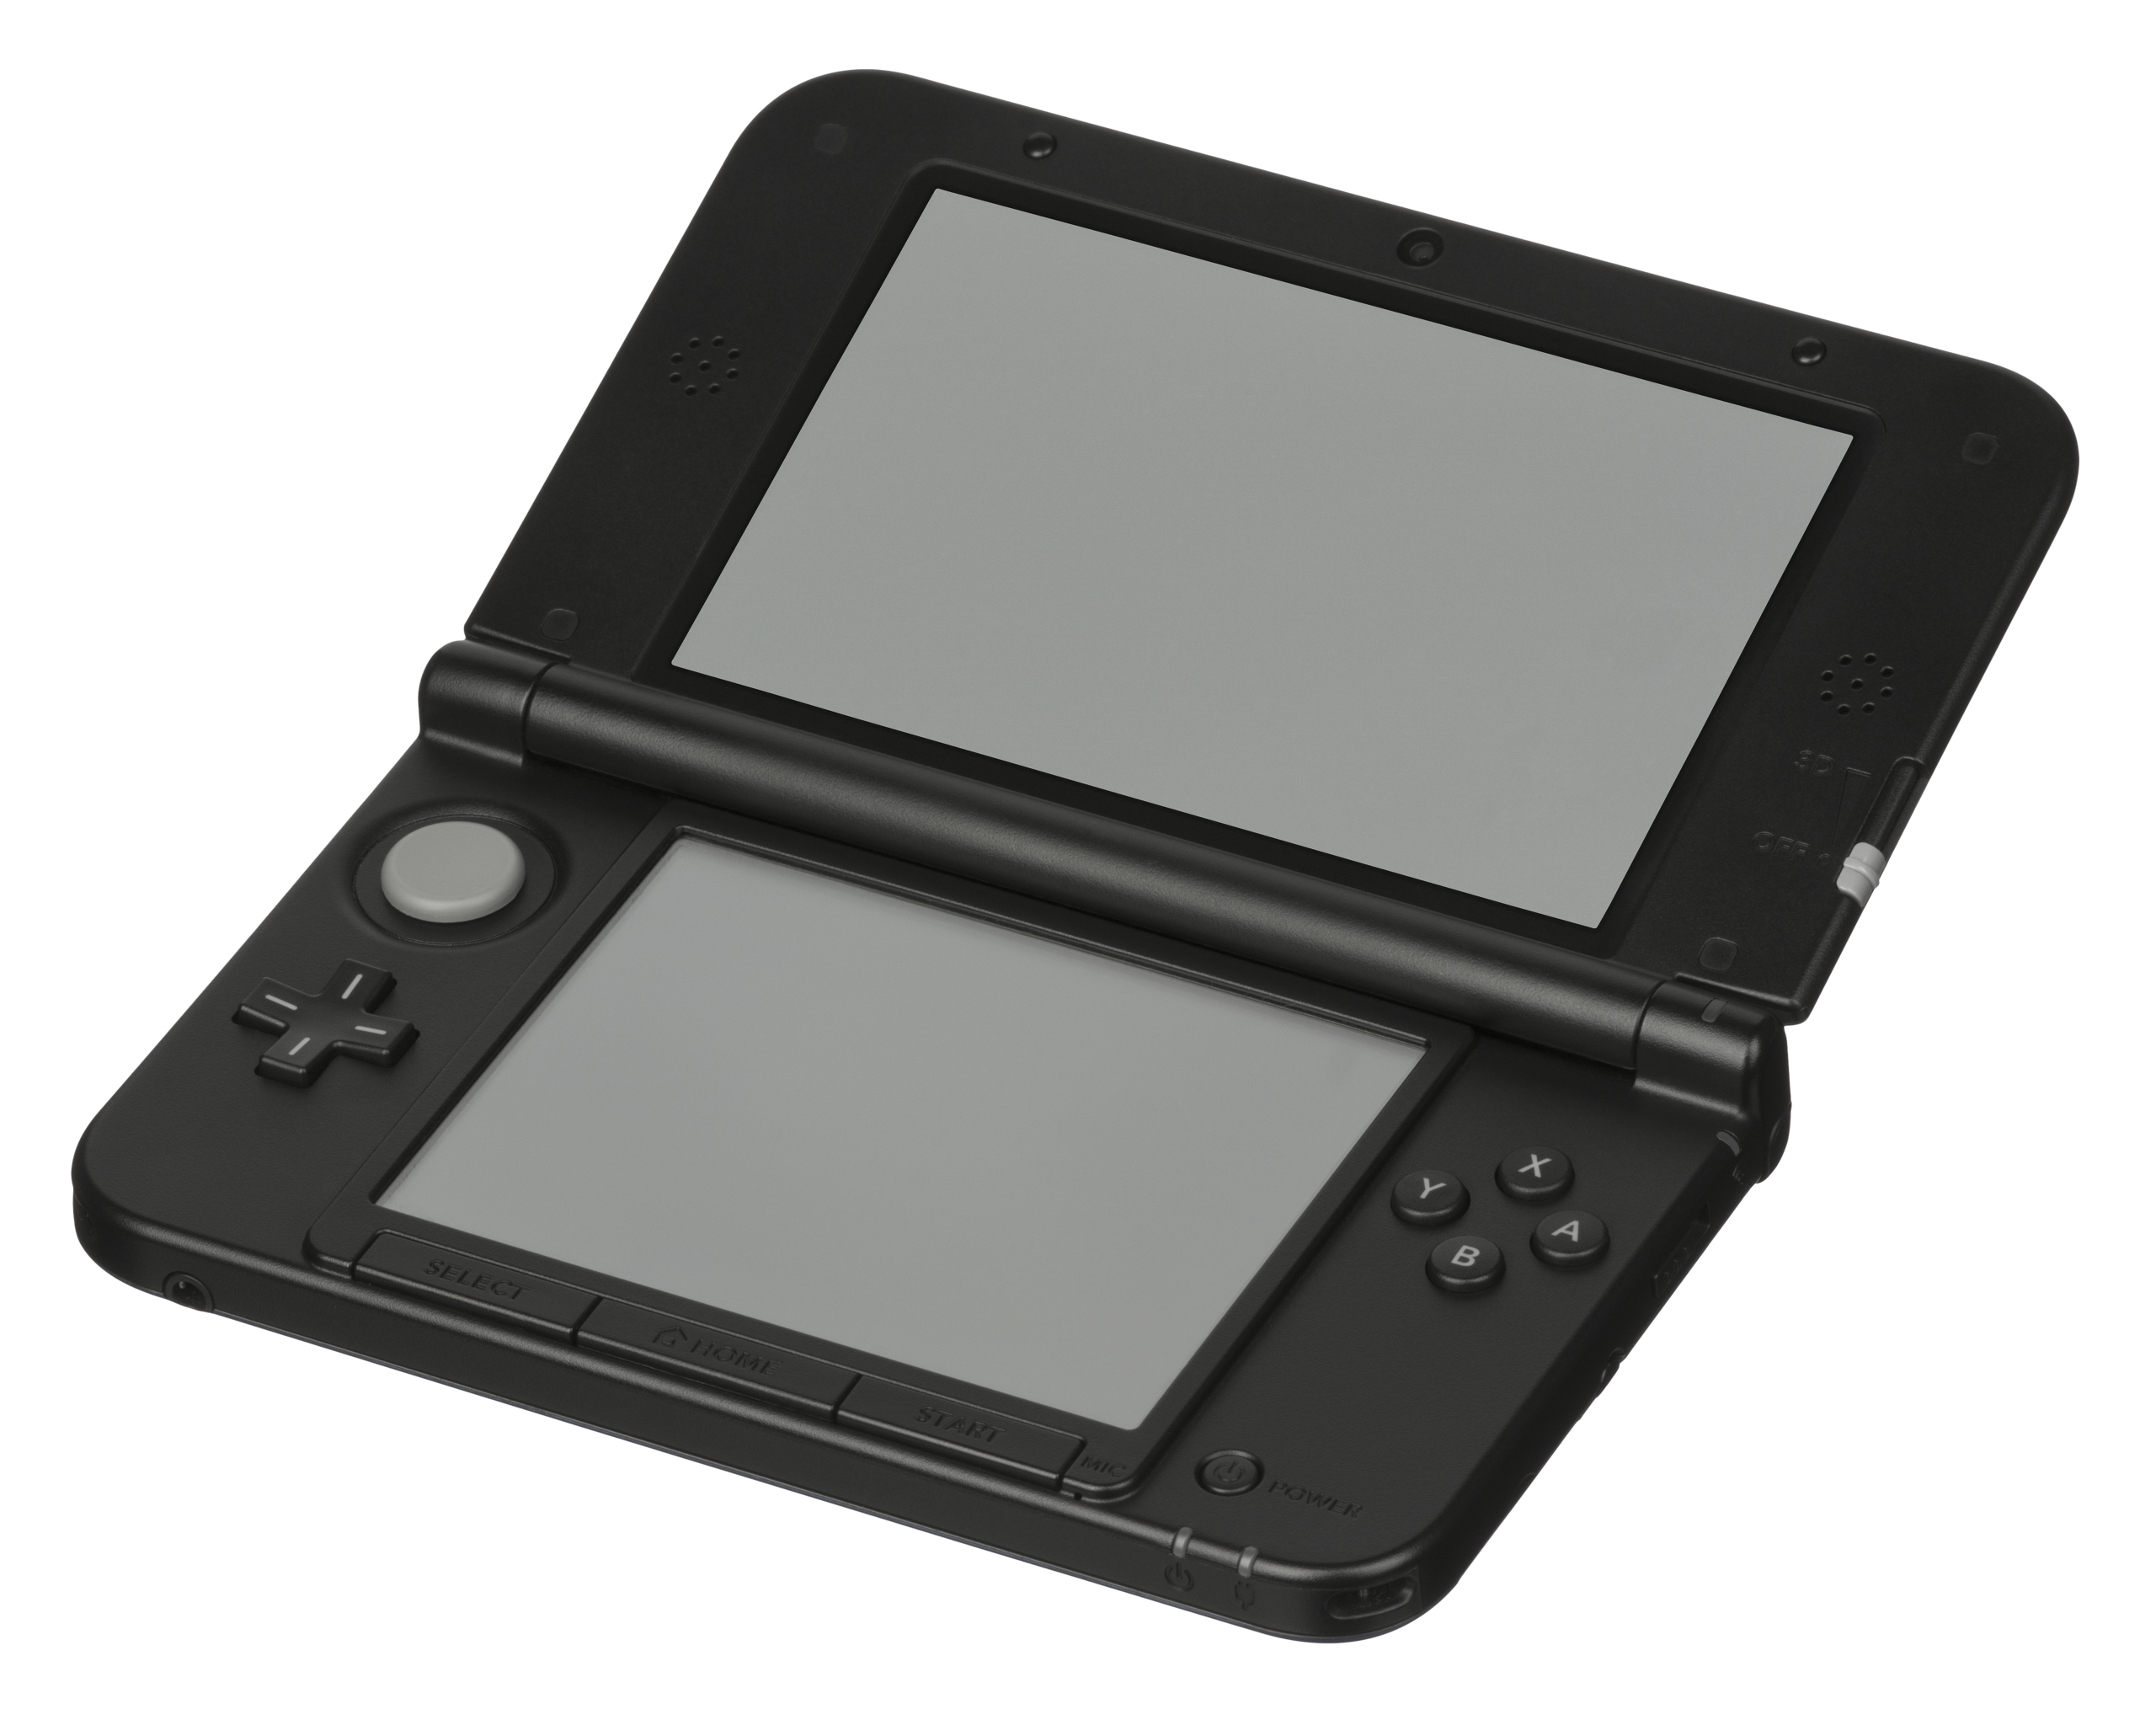 File:Nintendo-3DS-XL-angled.png - Wikipedia